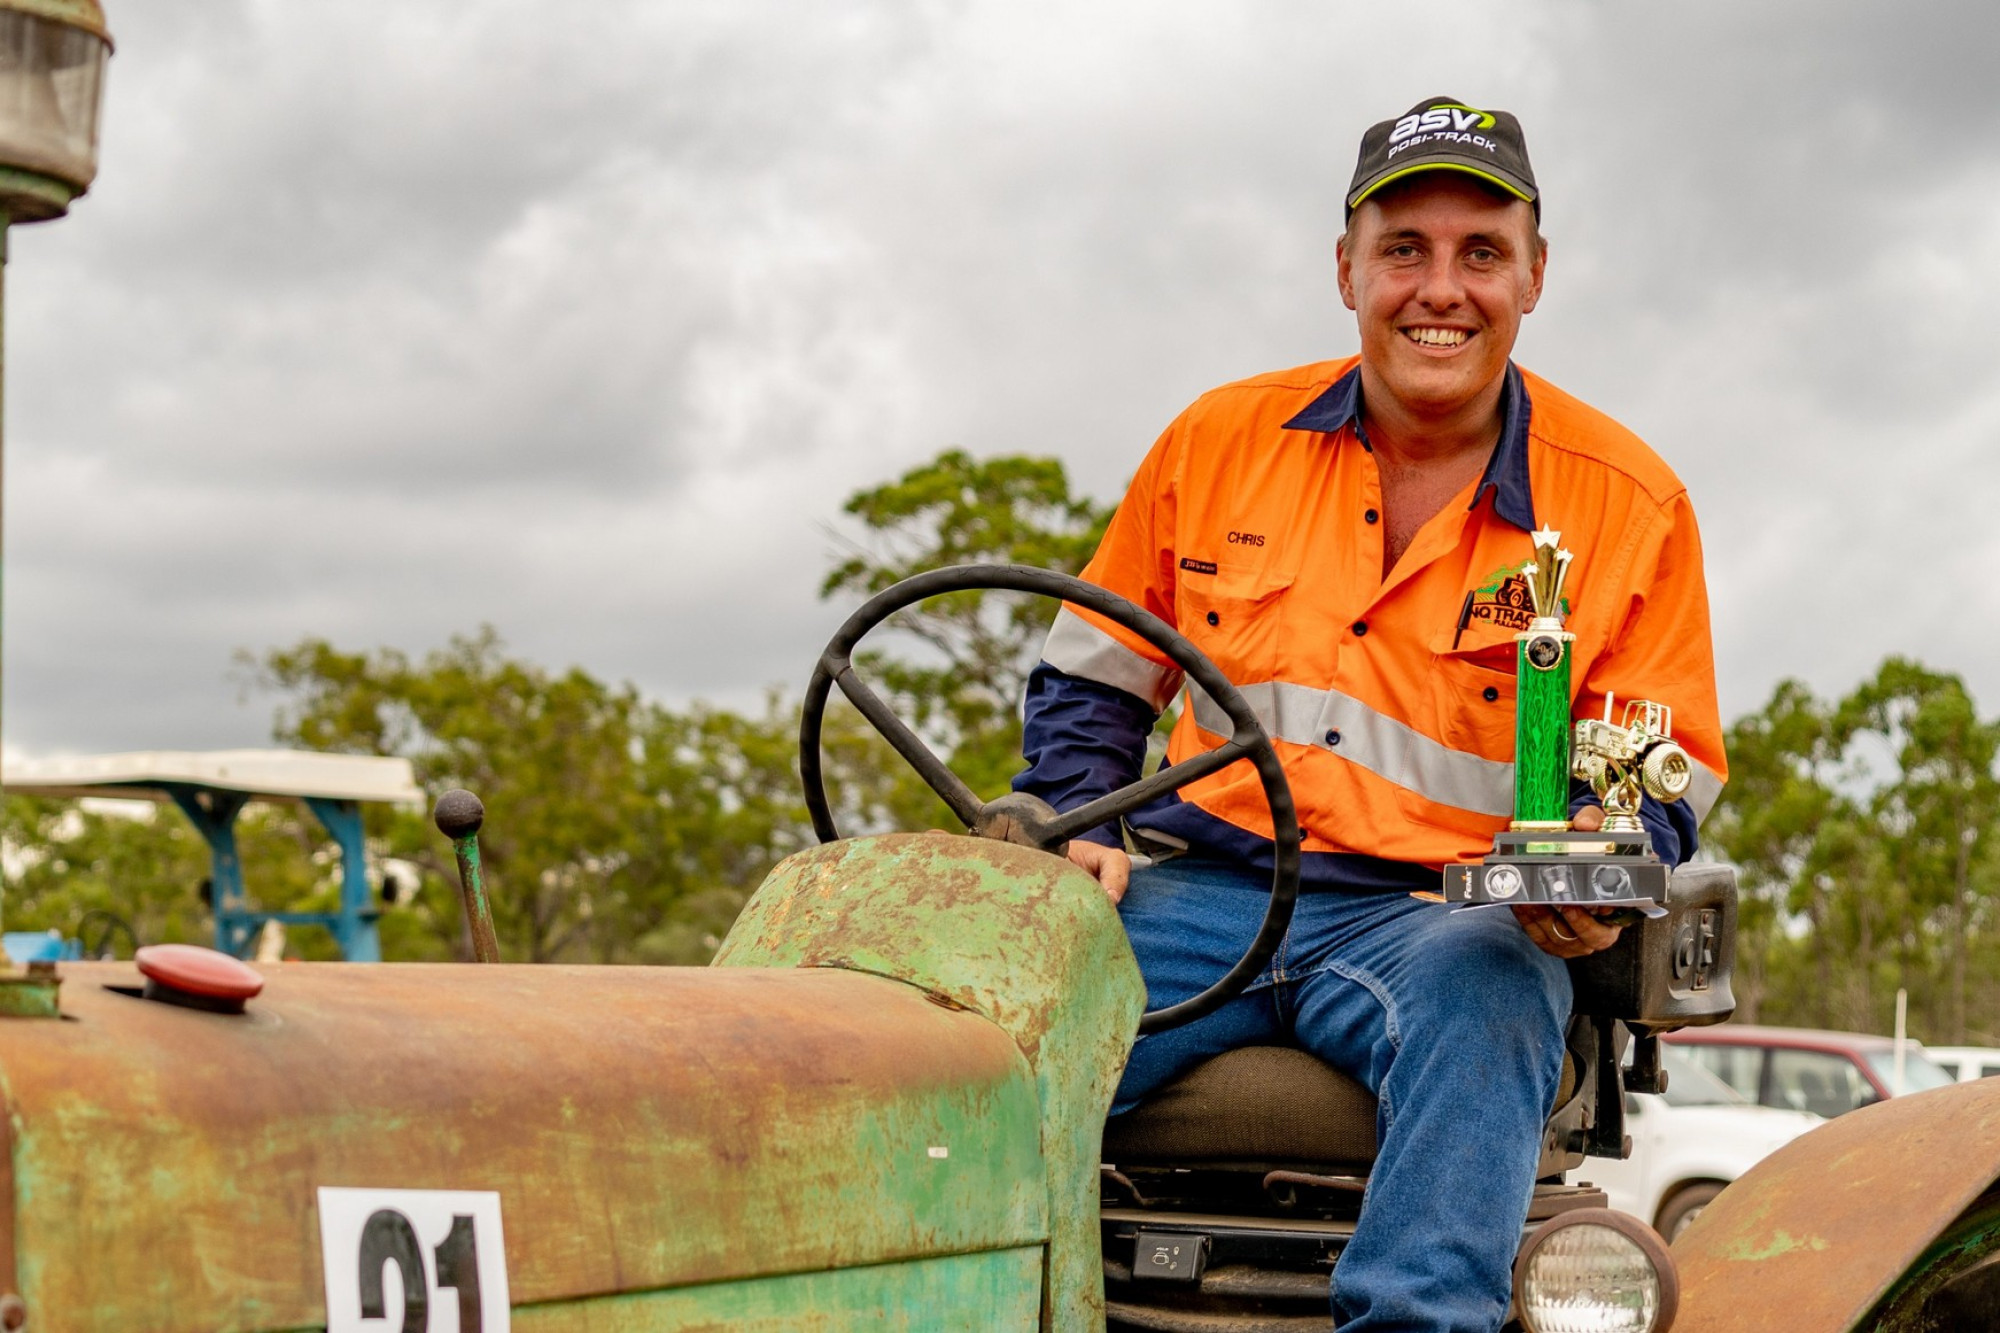 Tablelands grower nominated for national award - feature photo